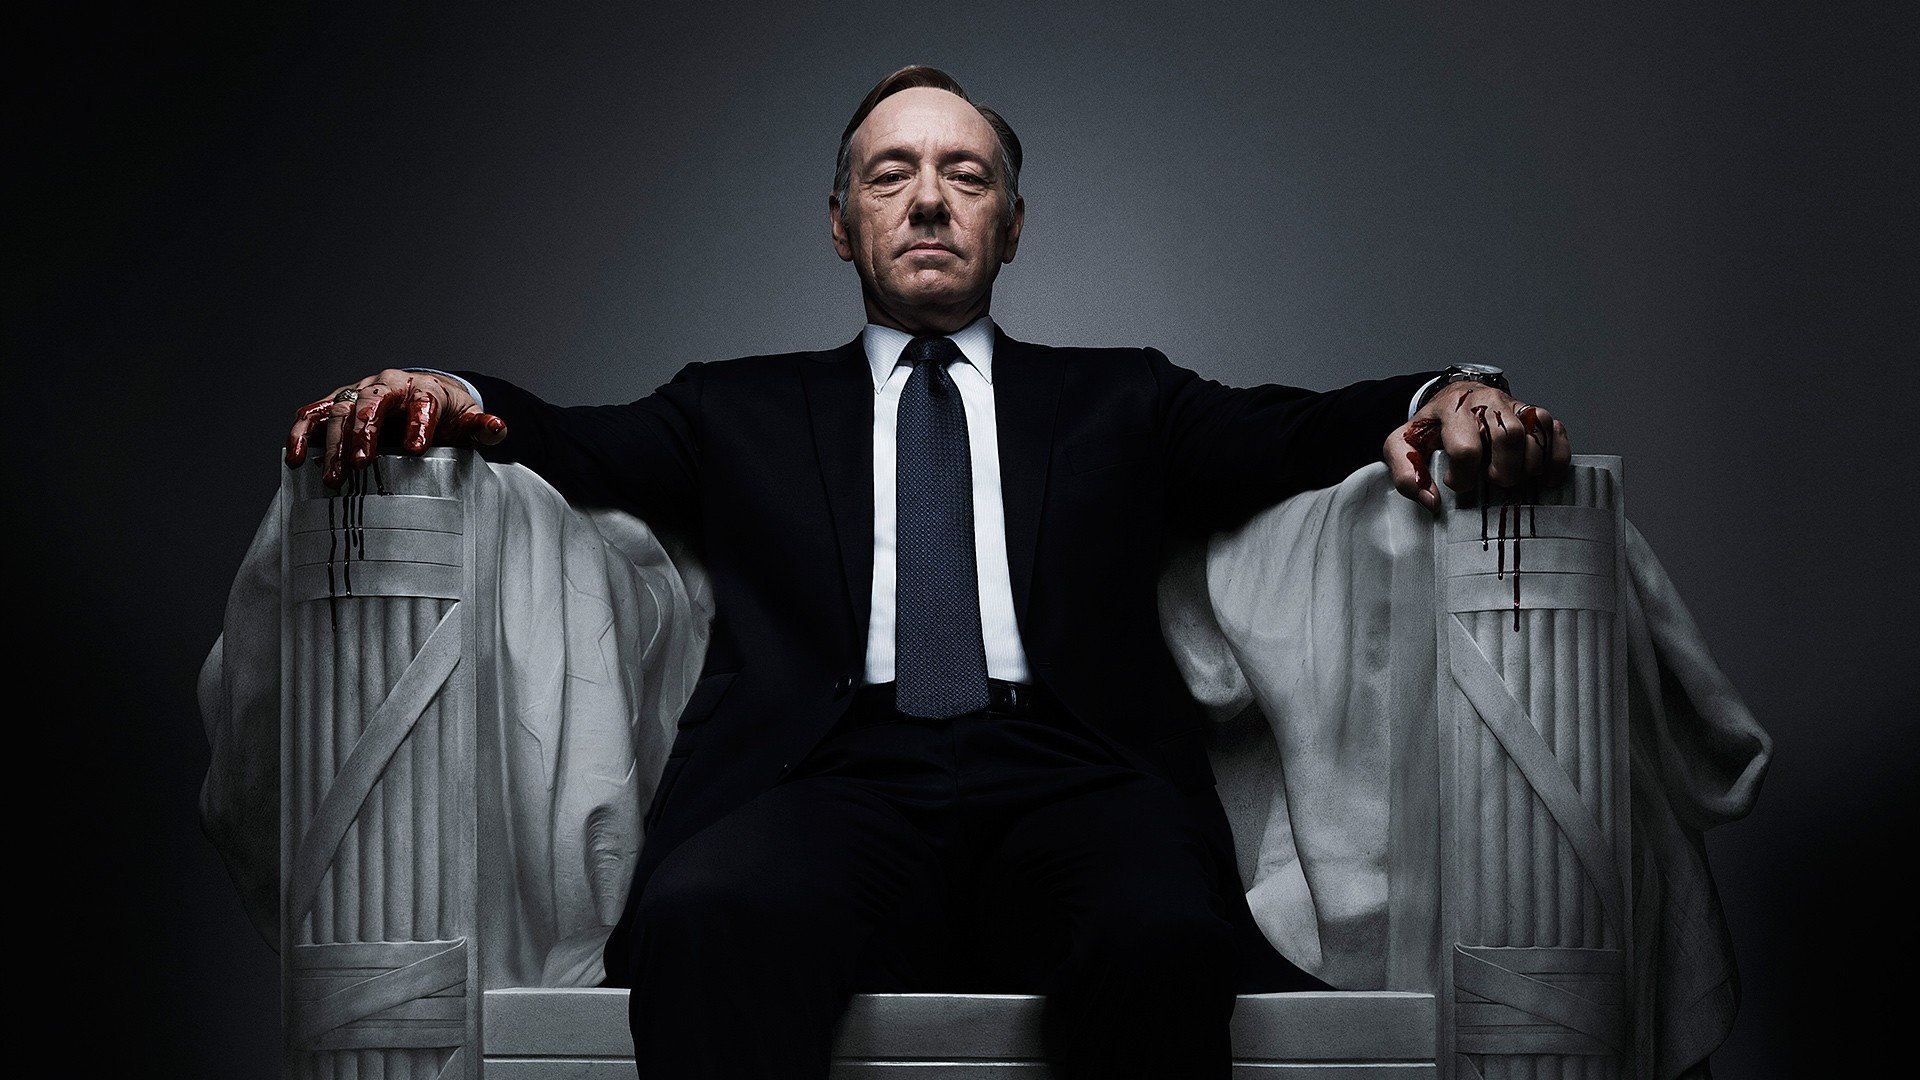 House of Cards wallpaper 2 1920x1080